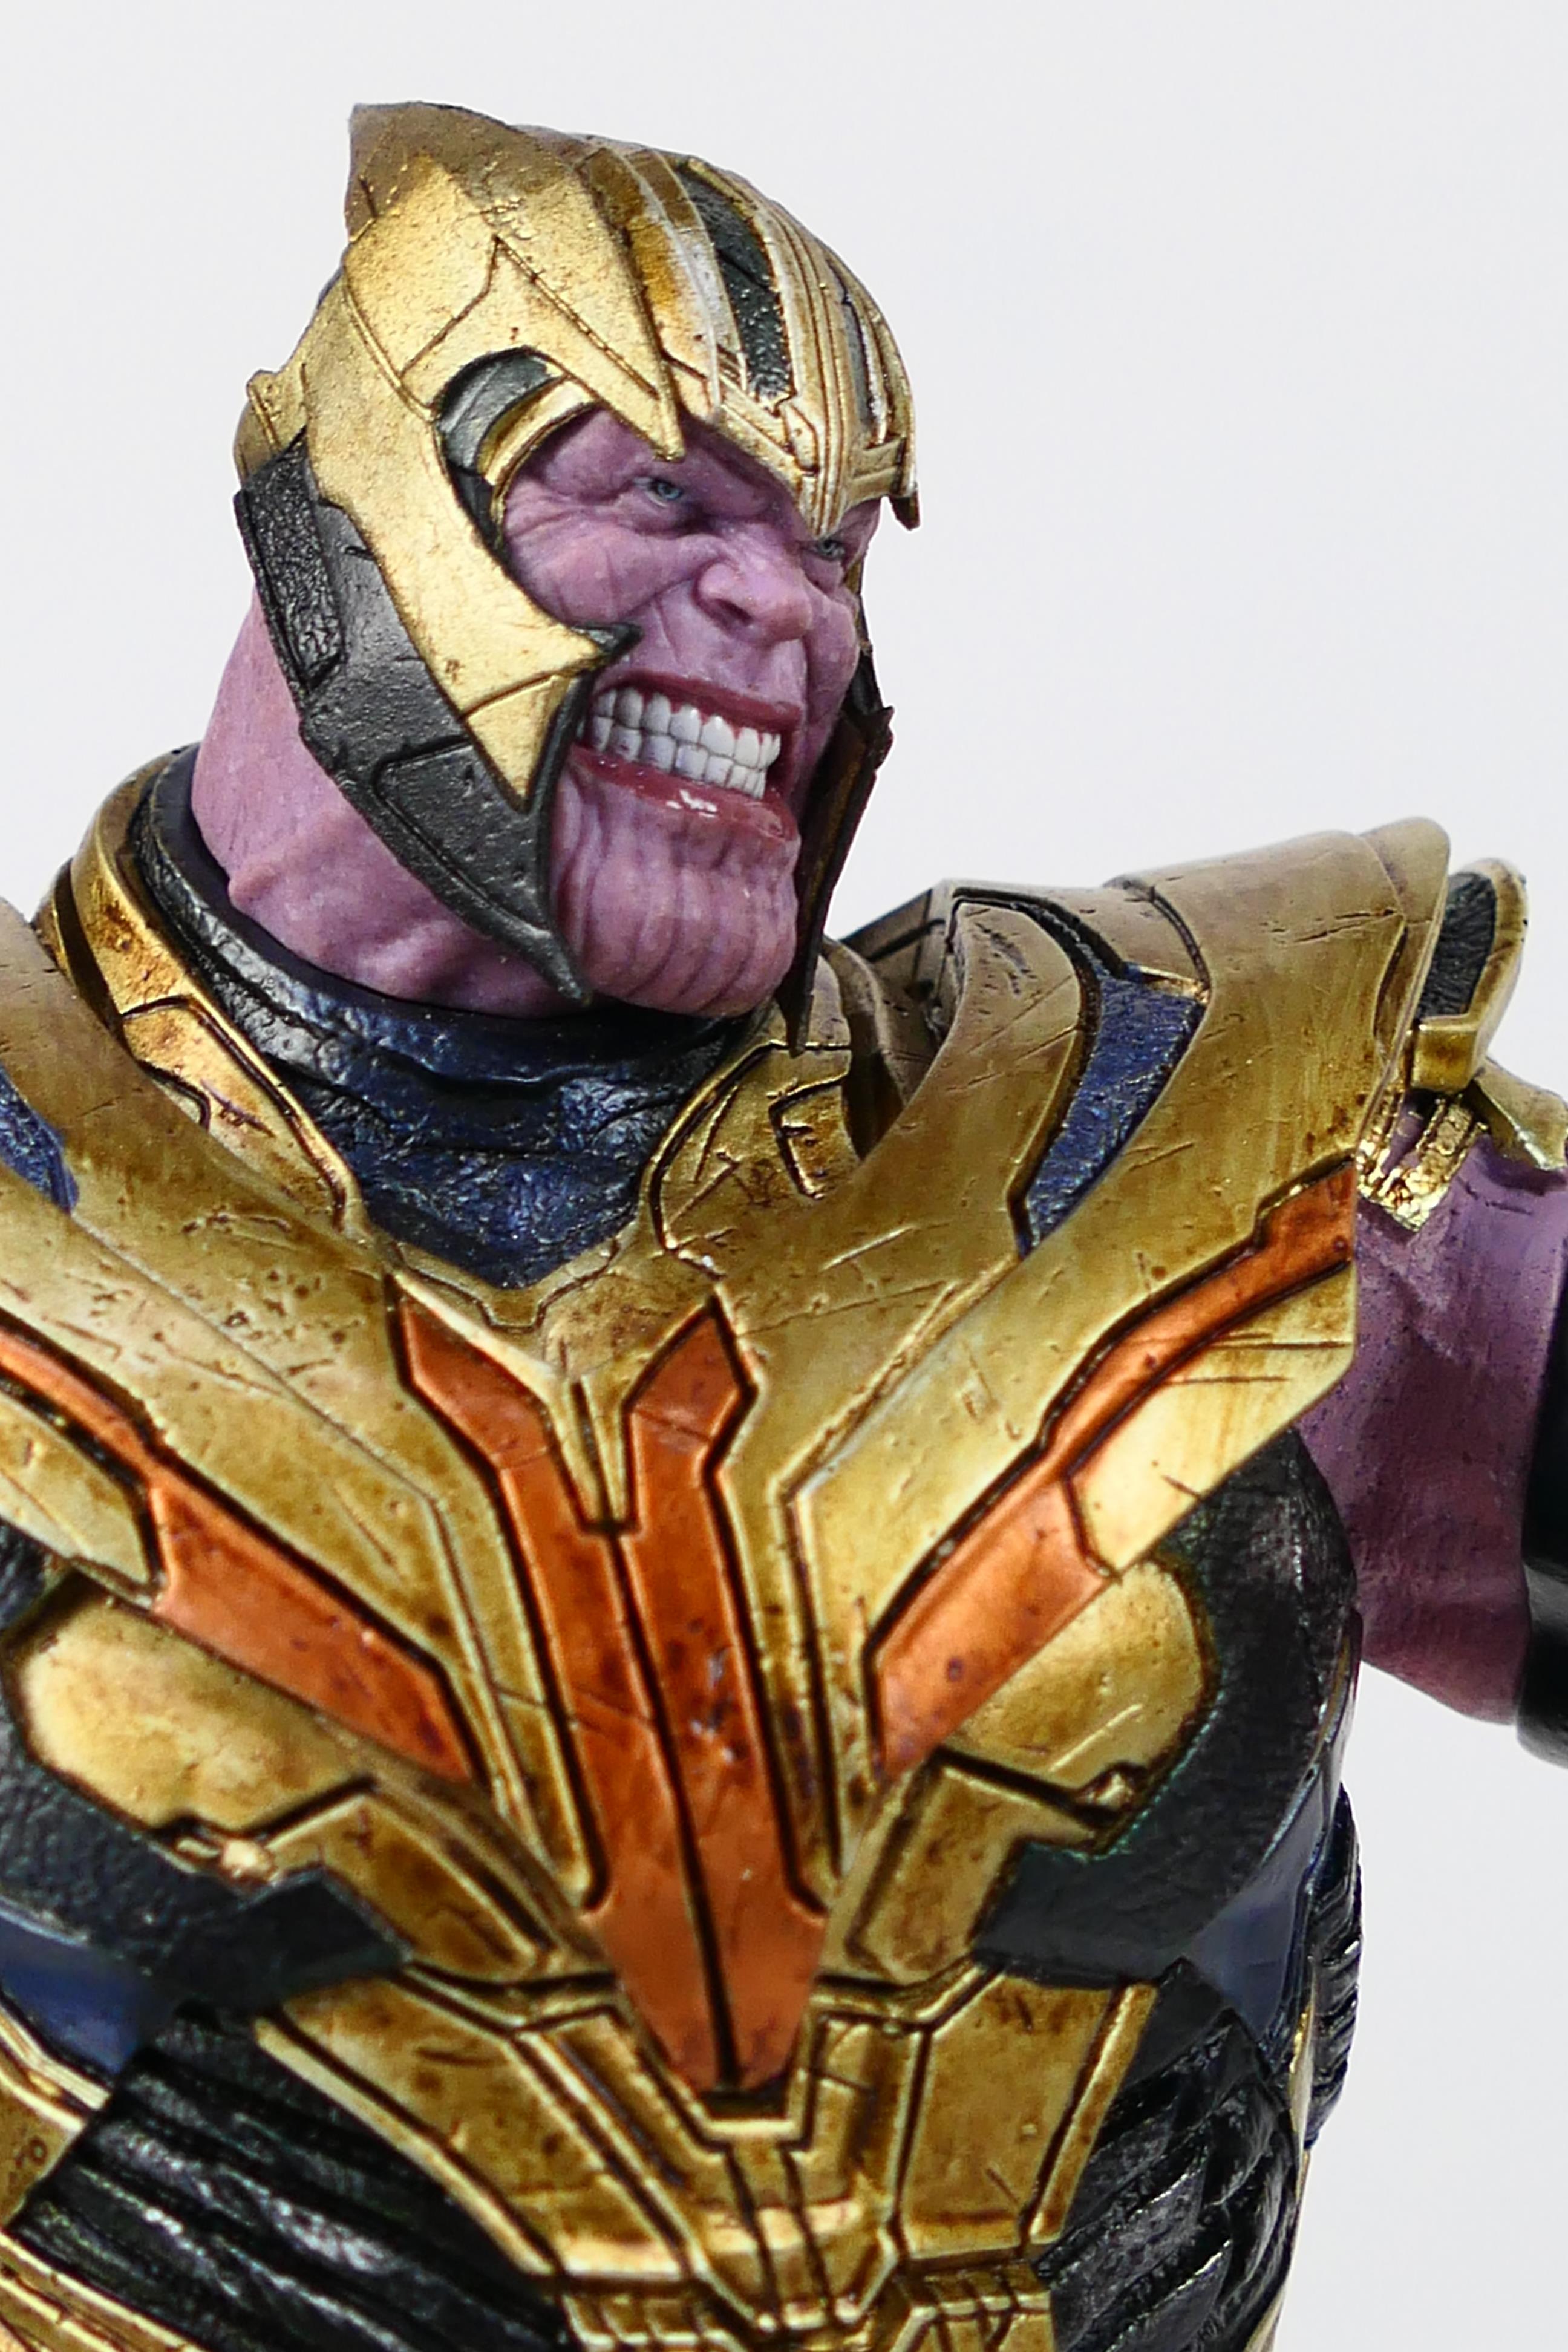 Marvel - Iron Studios - A limited edition BDS Deluxe Avengers Endgame Thanos statue in 1/10 scale. - Image 4 of 8